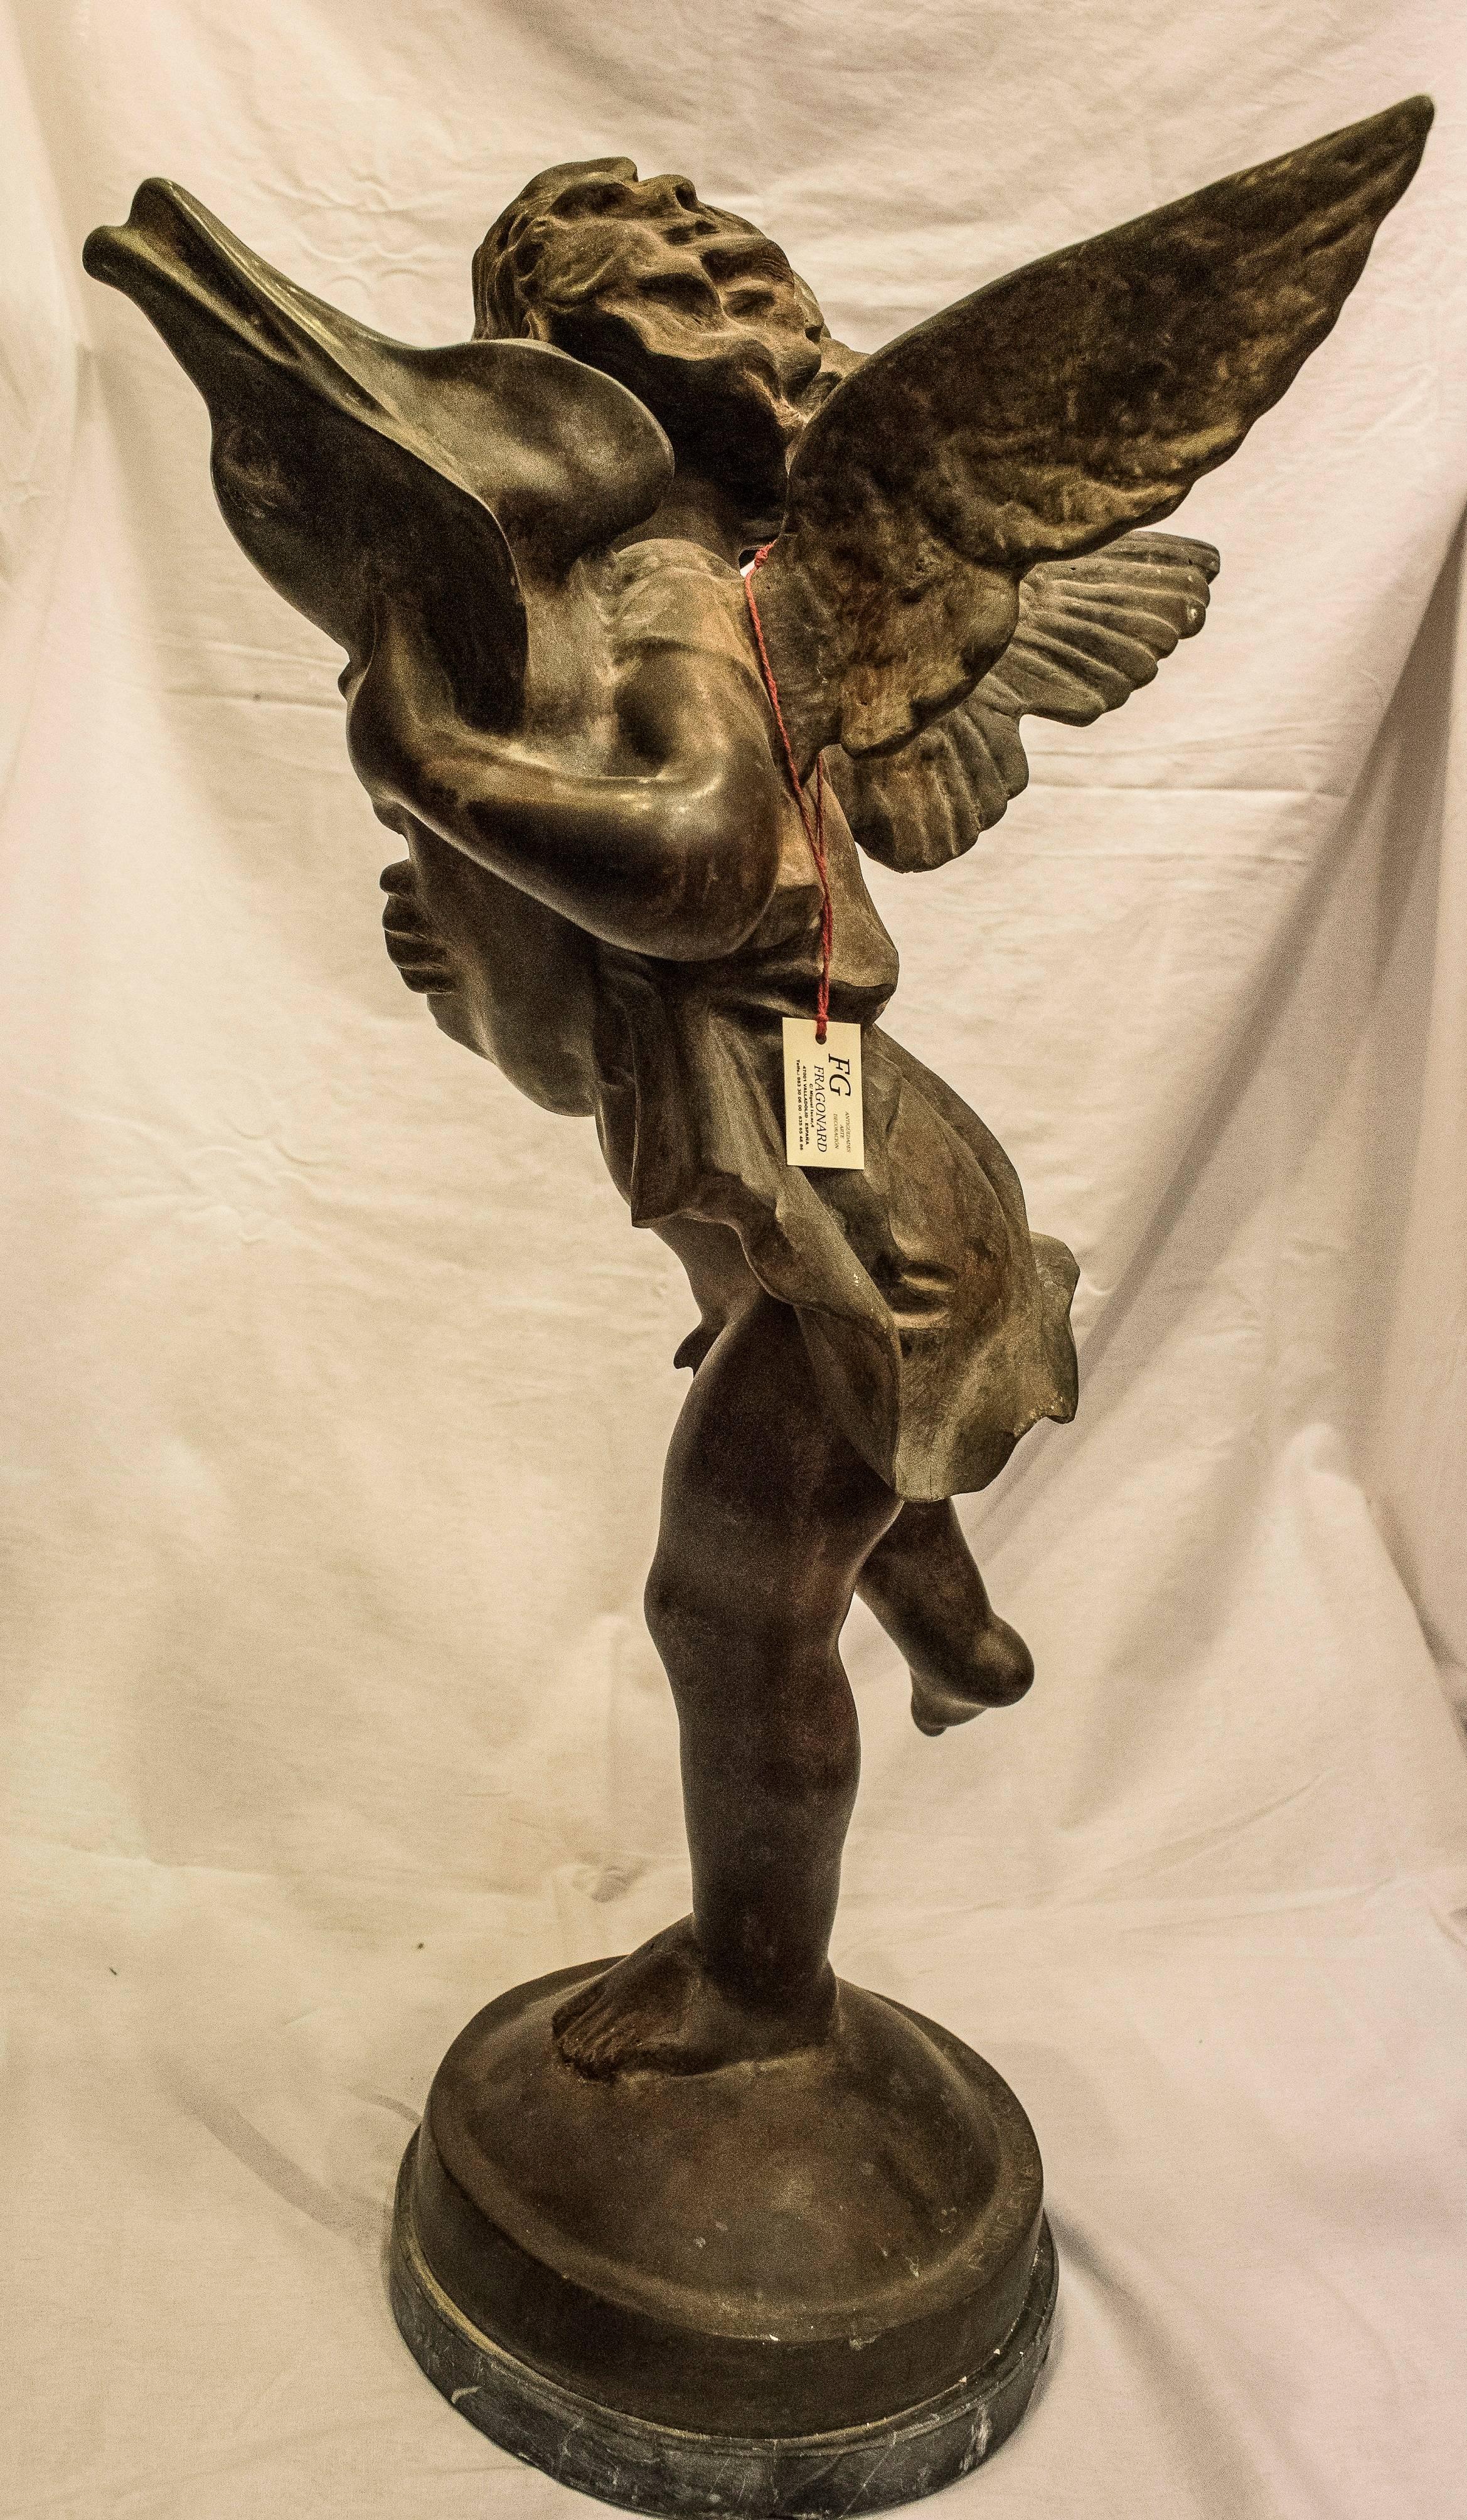 A French patinated bronze sculpture named “Putti with a dolphin” from Napoleon III period in the 19th century in a good condition.